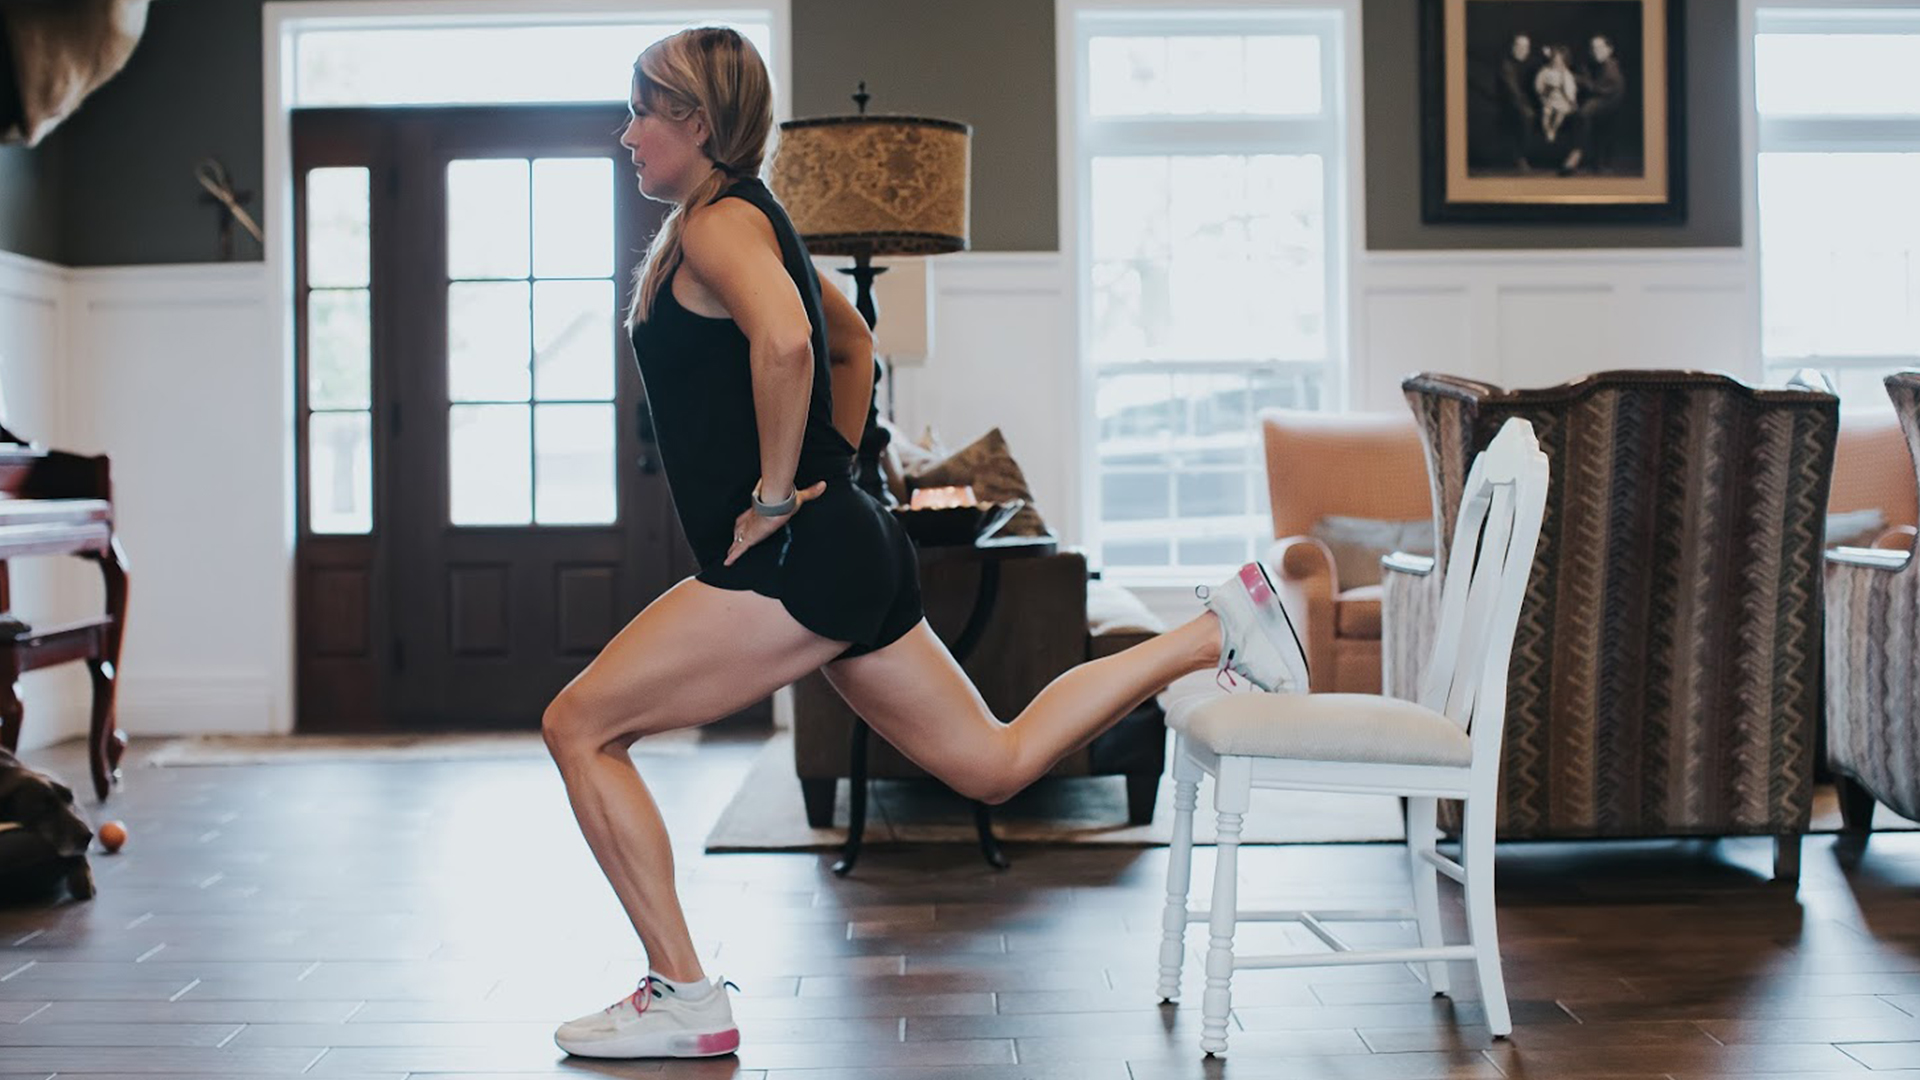 Jill Lewis working out at home with a dining chair